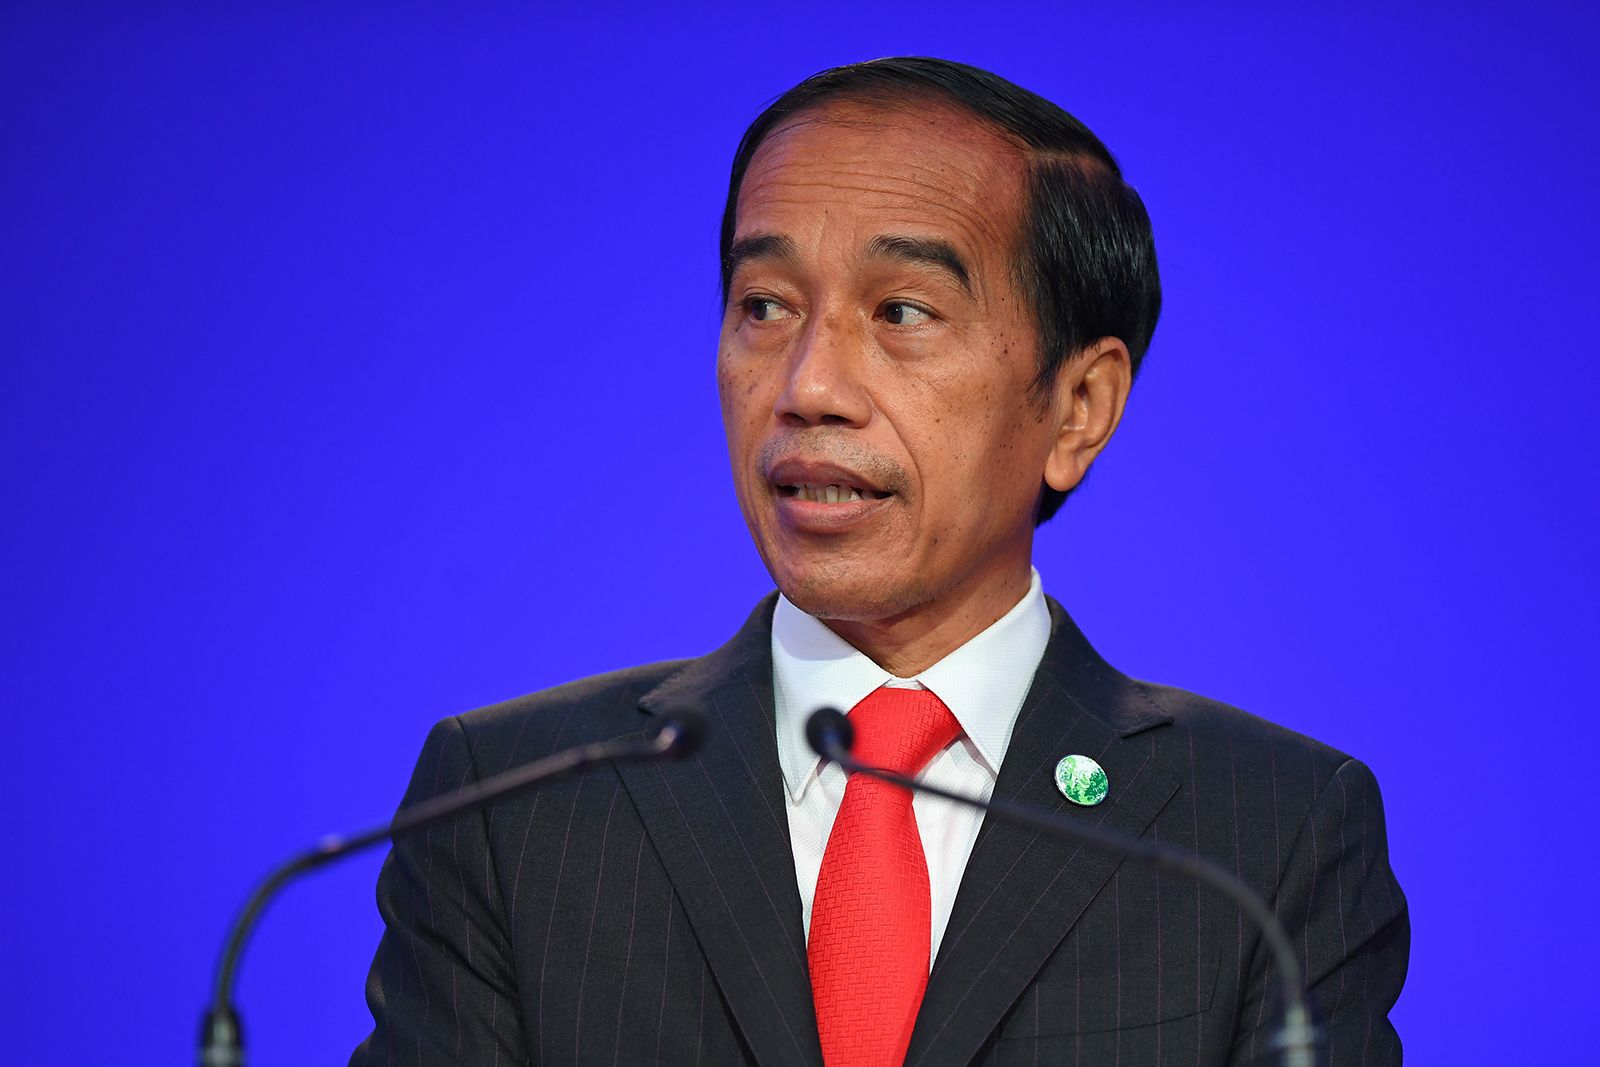 Widodo accused of allegedly interfering with the election process (Credits: CNN)